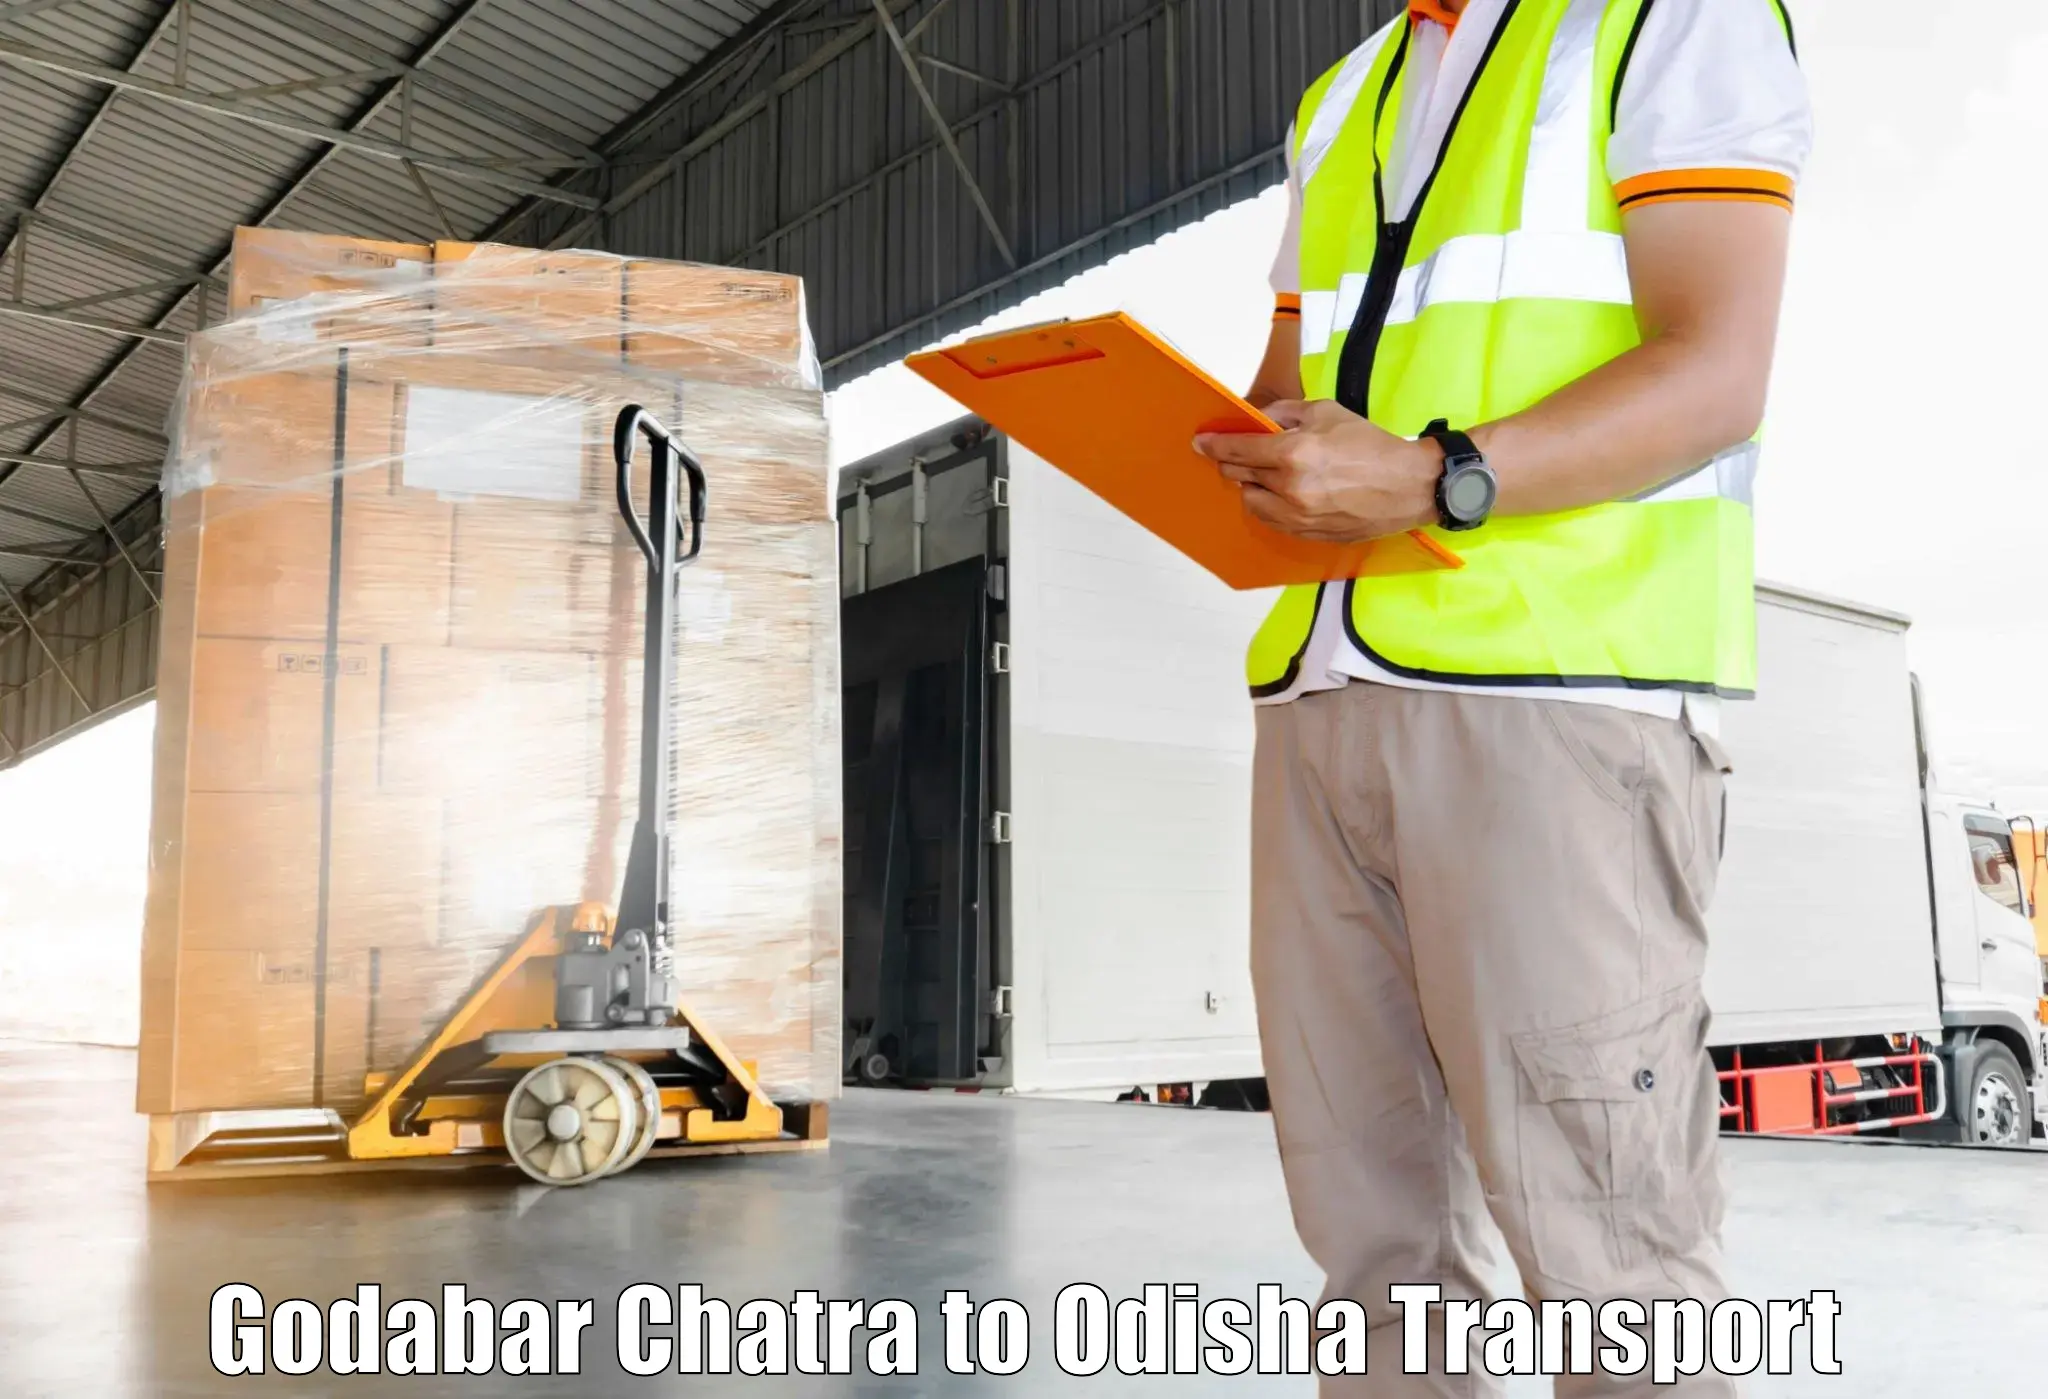 Truck transport companies in India in Godabar Chatra to Kandhamal